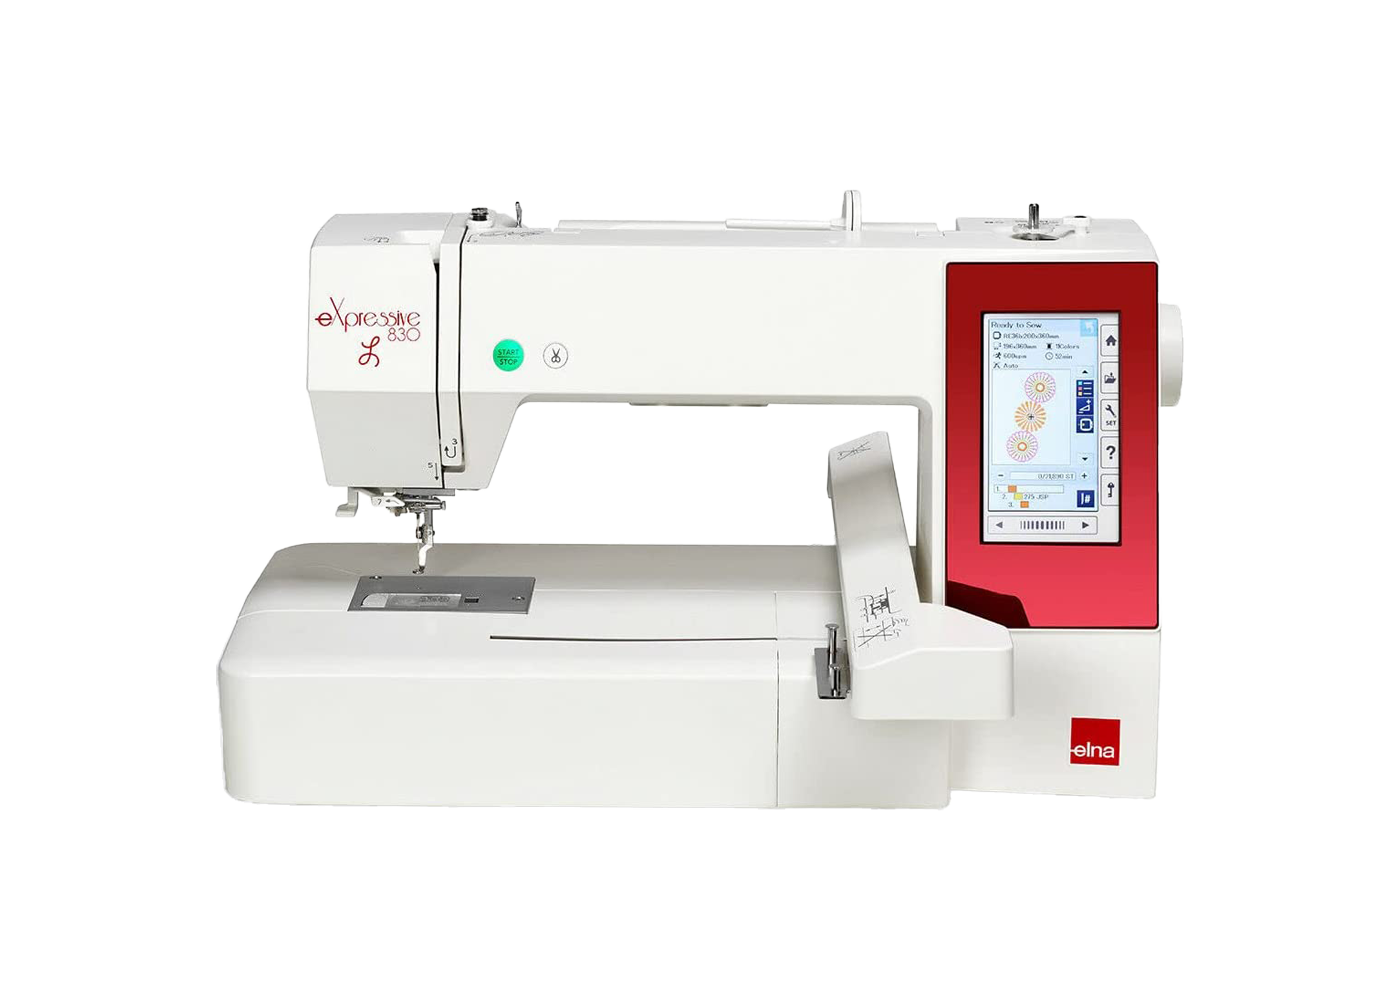 elna eXpressive 830L Sewing and Embroidery Machine